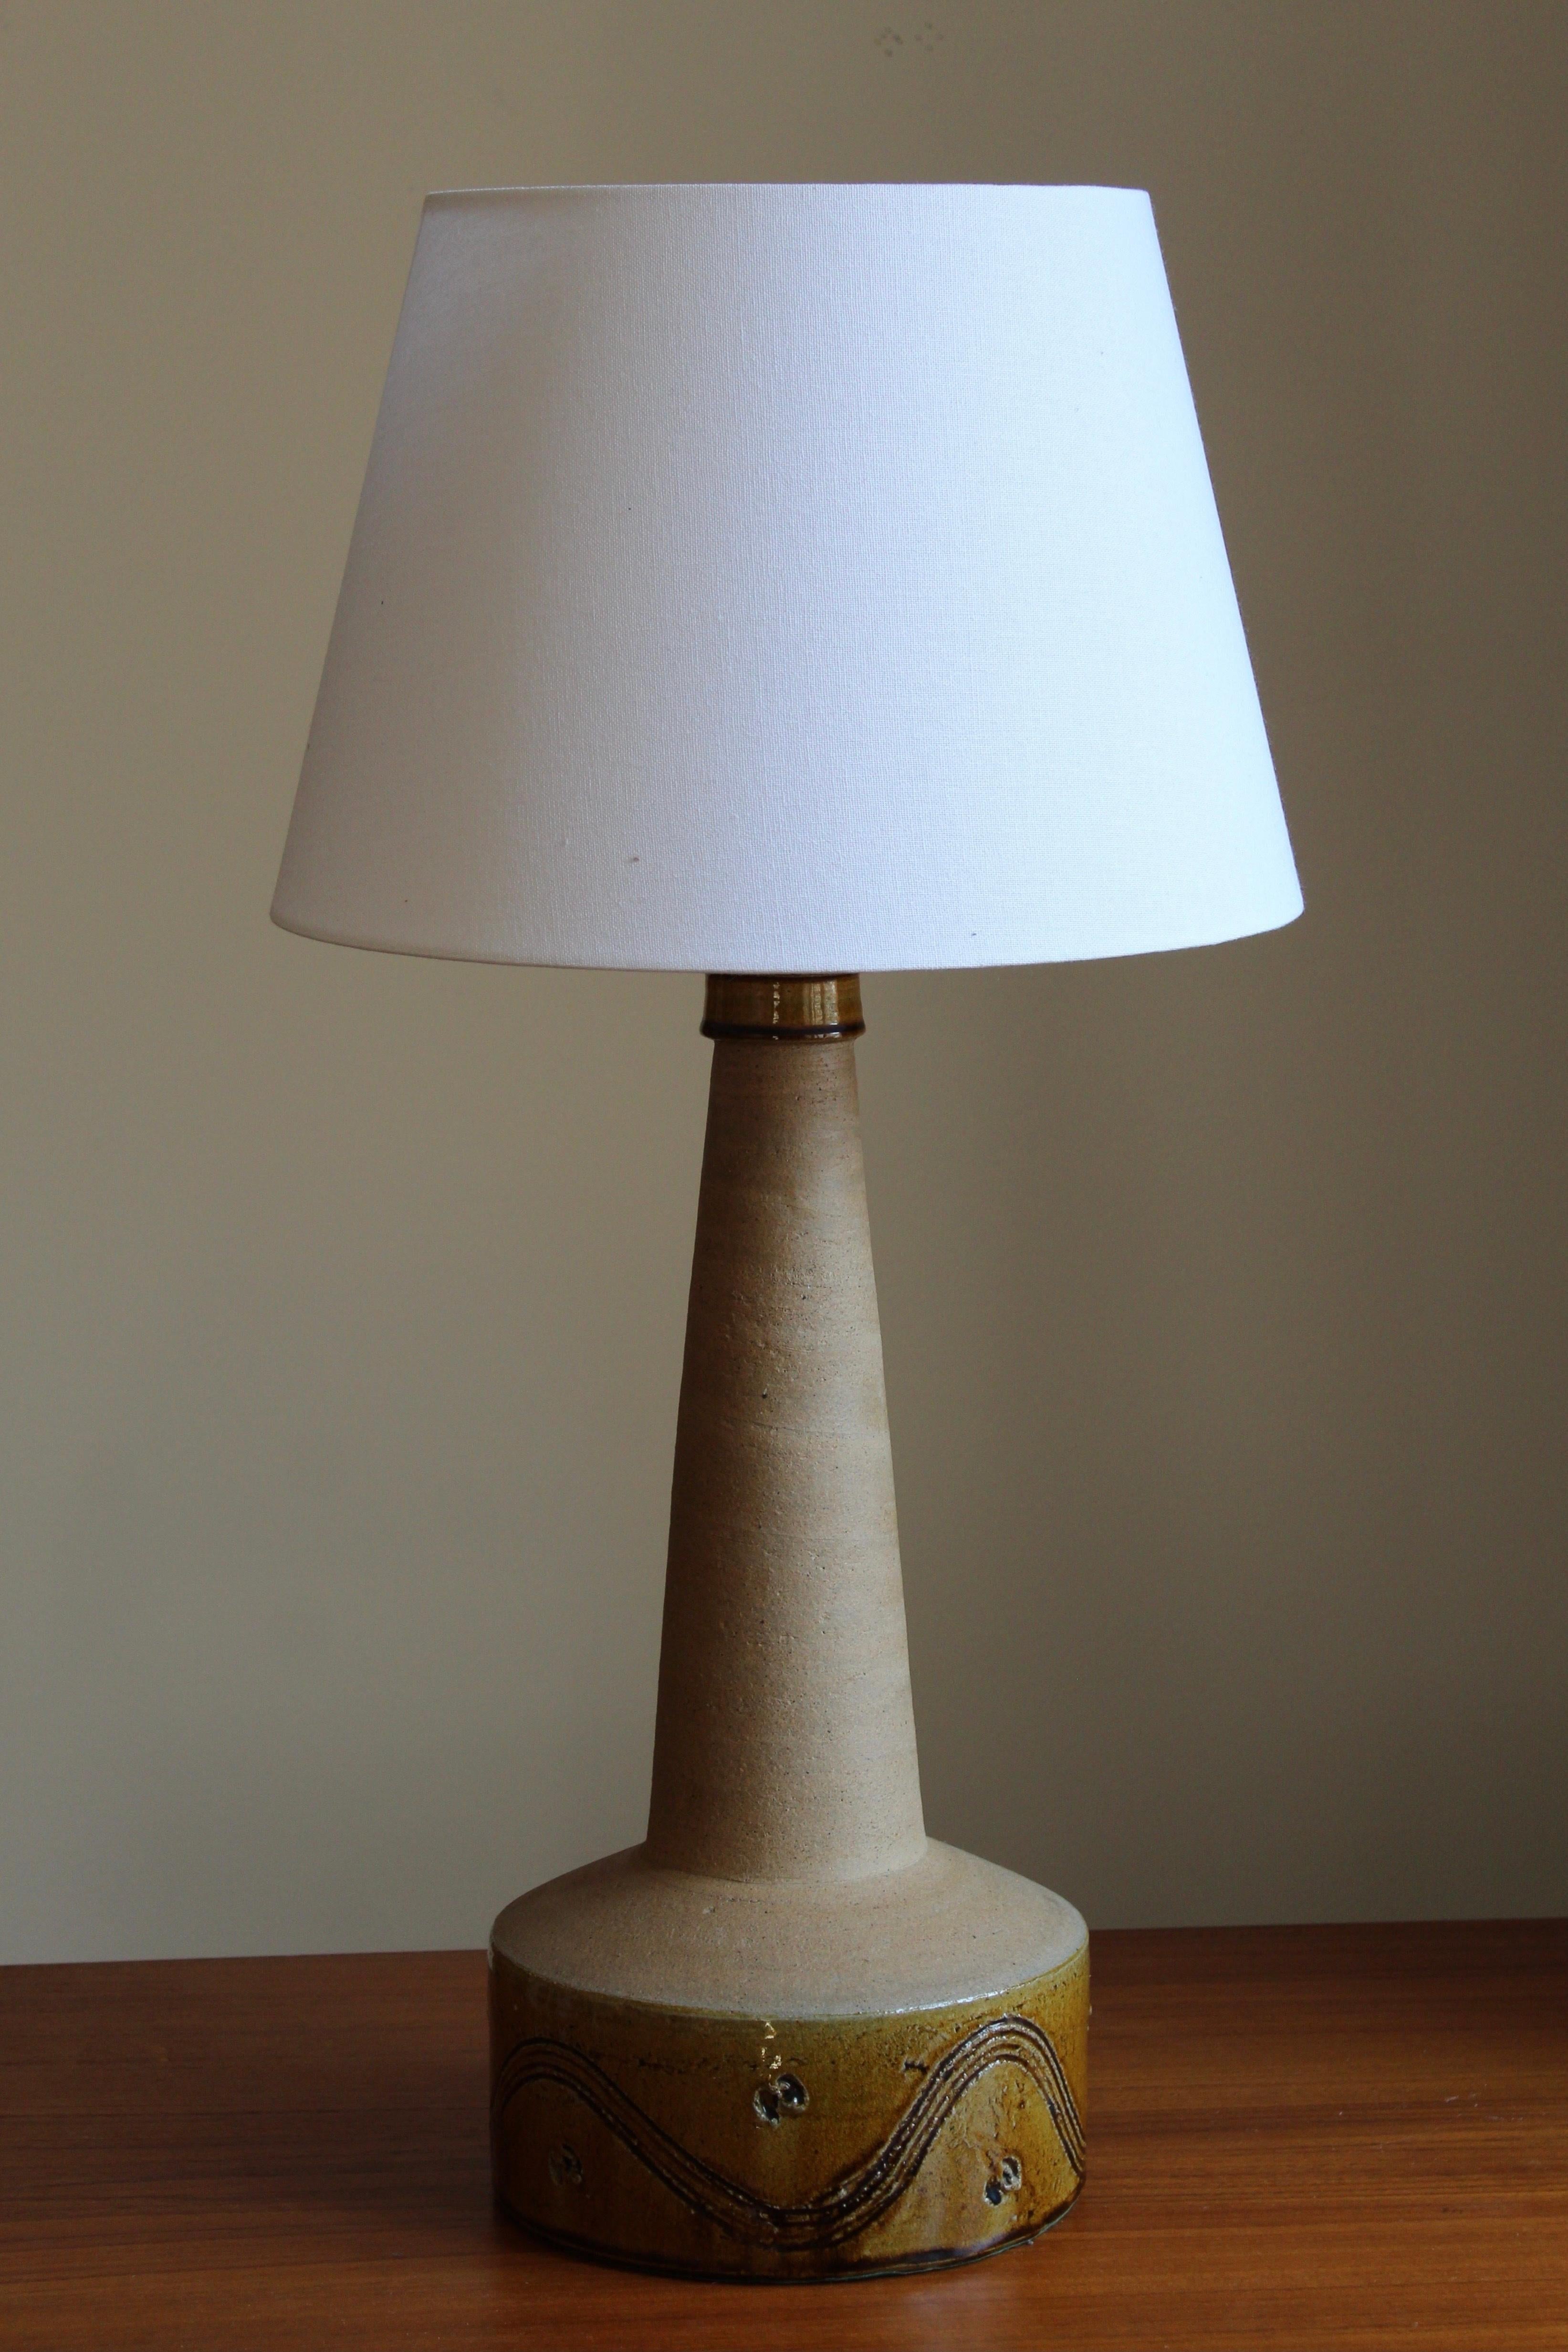 A large table lamp, designed and produced by Kähler, Denmark, c. 1930s. 

Glaze features brown-yellow-grey colors.

The lampshade is not included, stated dimensions are excluding lampshade.

